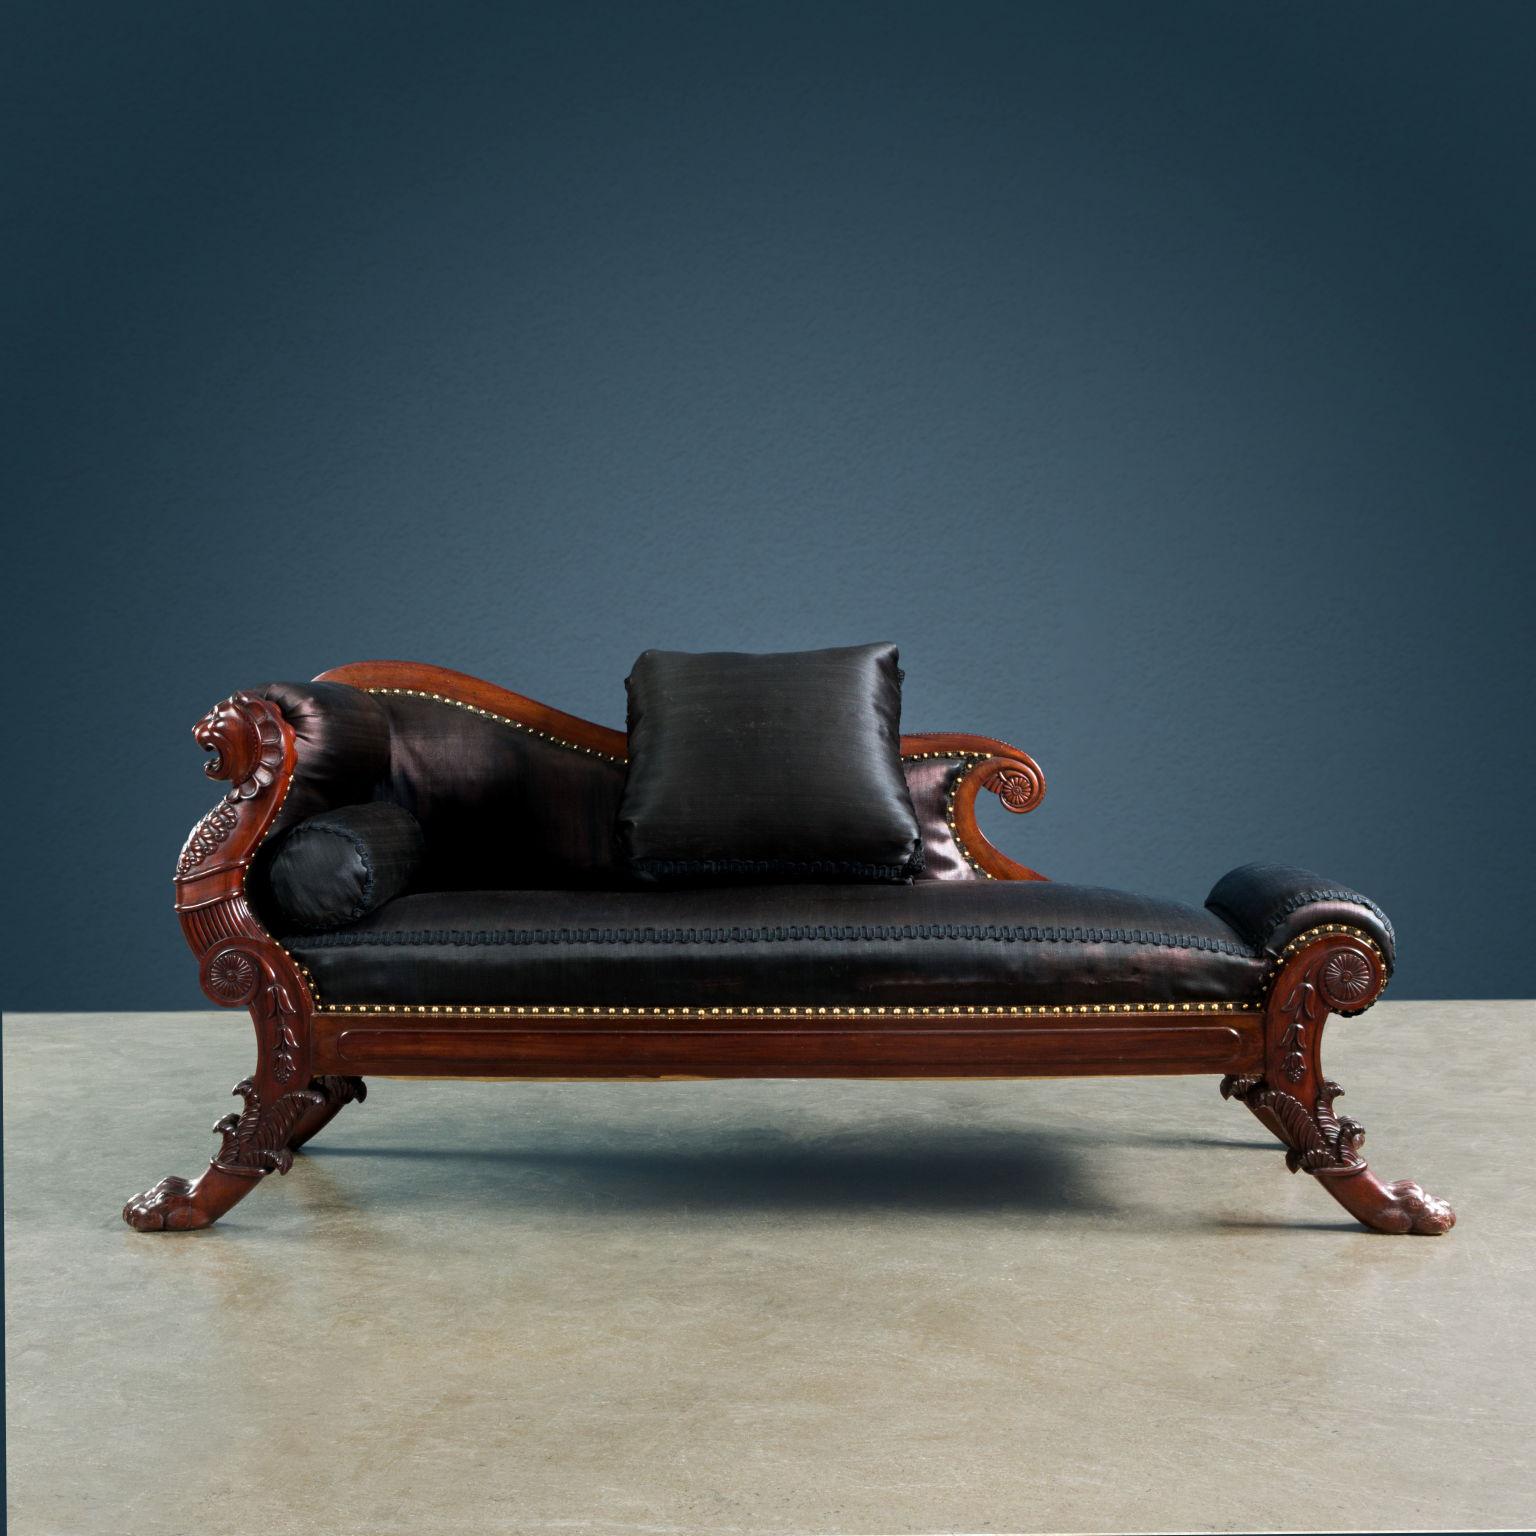 Other Dormeuse. Milan, c. 1860, black and brown For Sale